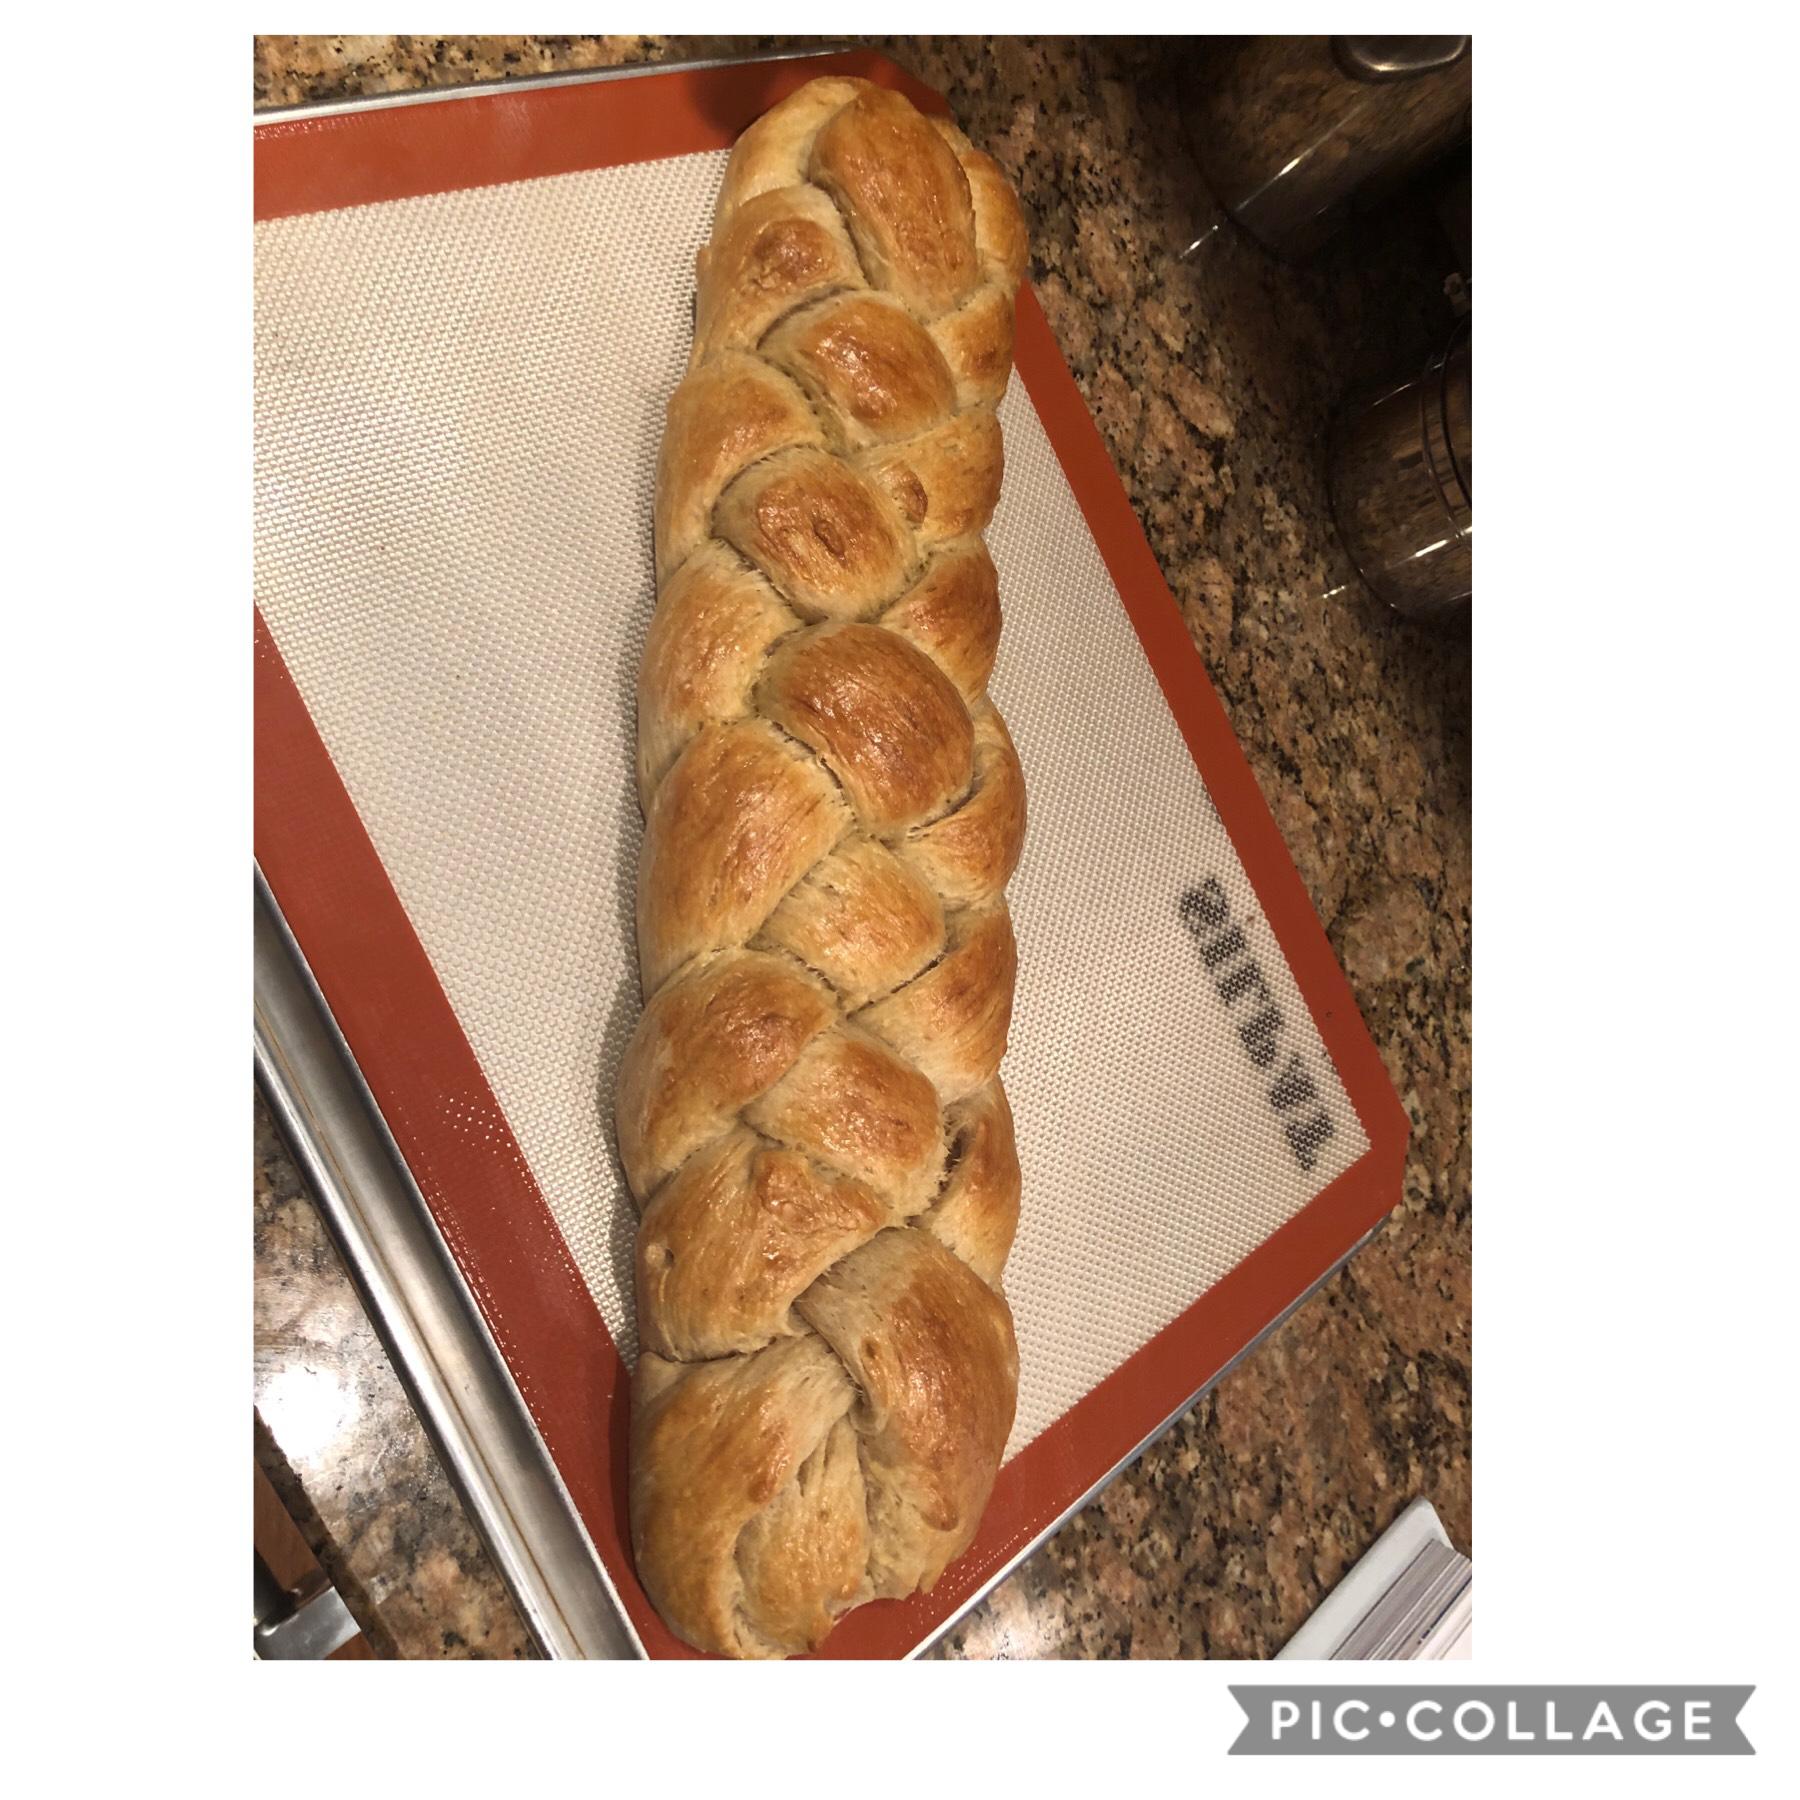 update: the bread is done and it is very delicious 